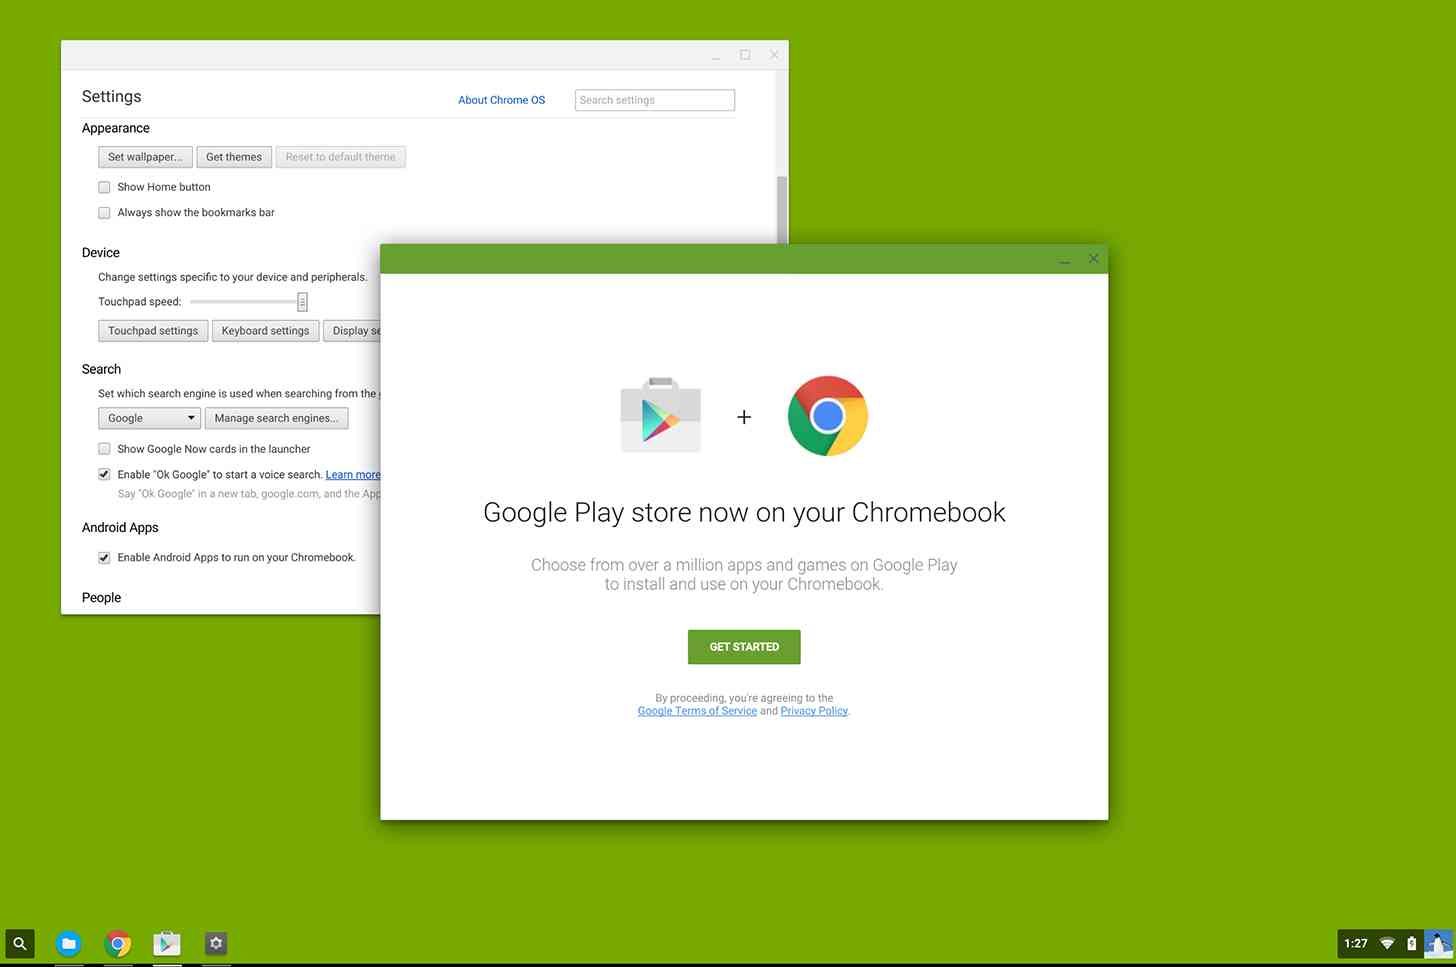 Android apps Chrome OS